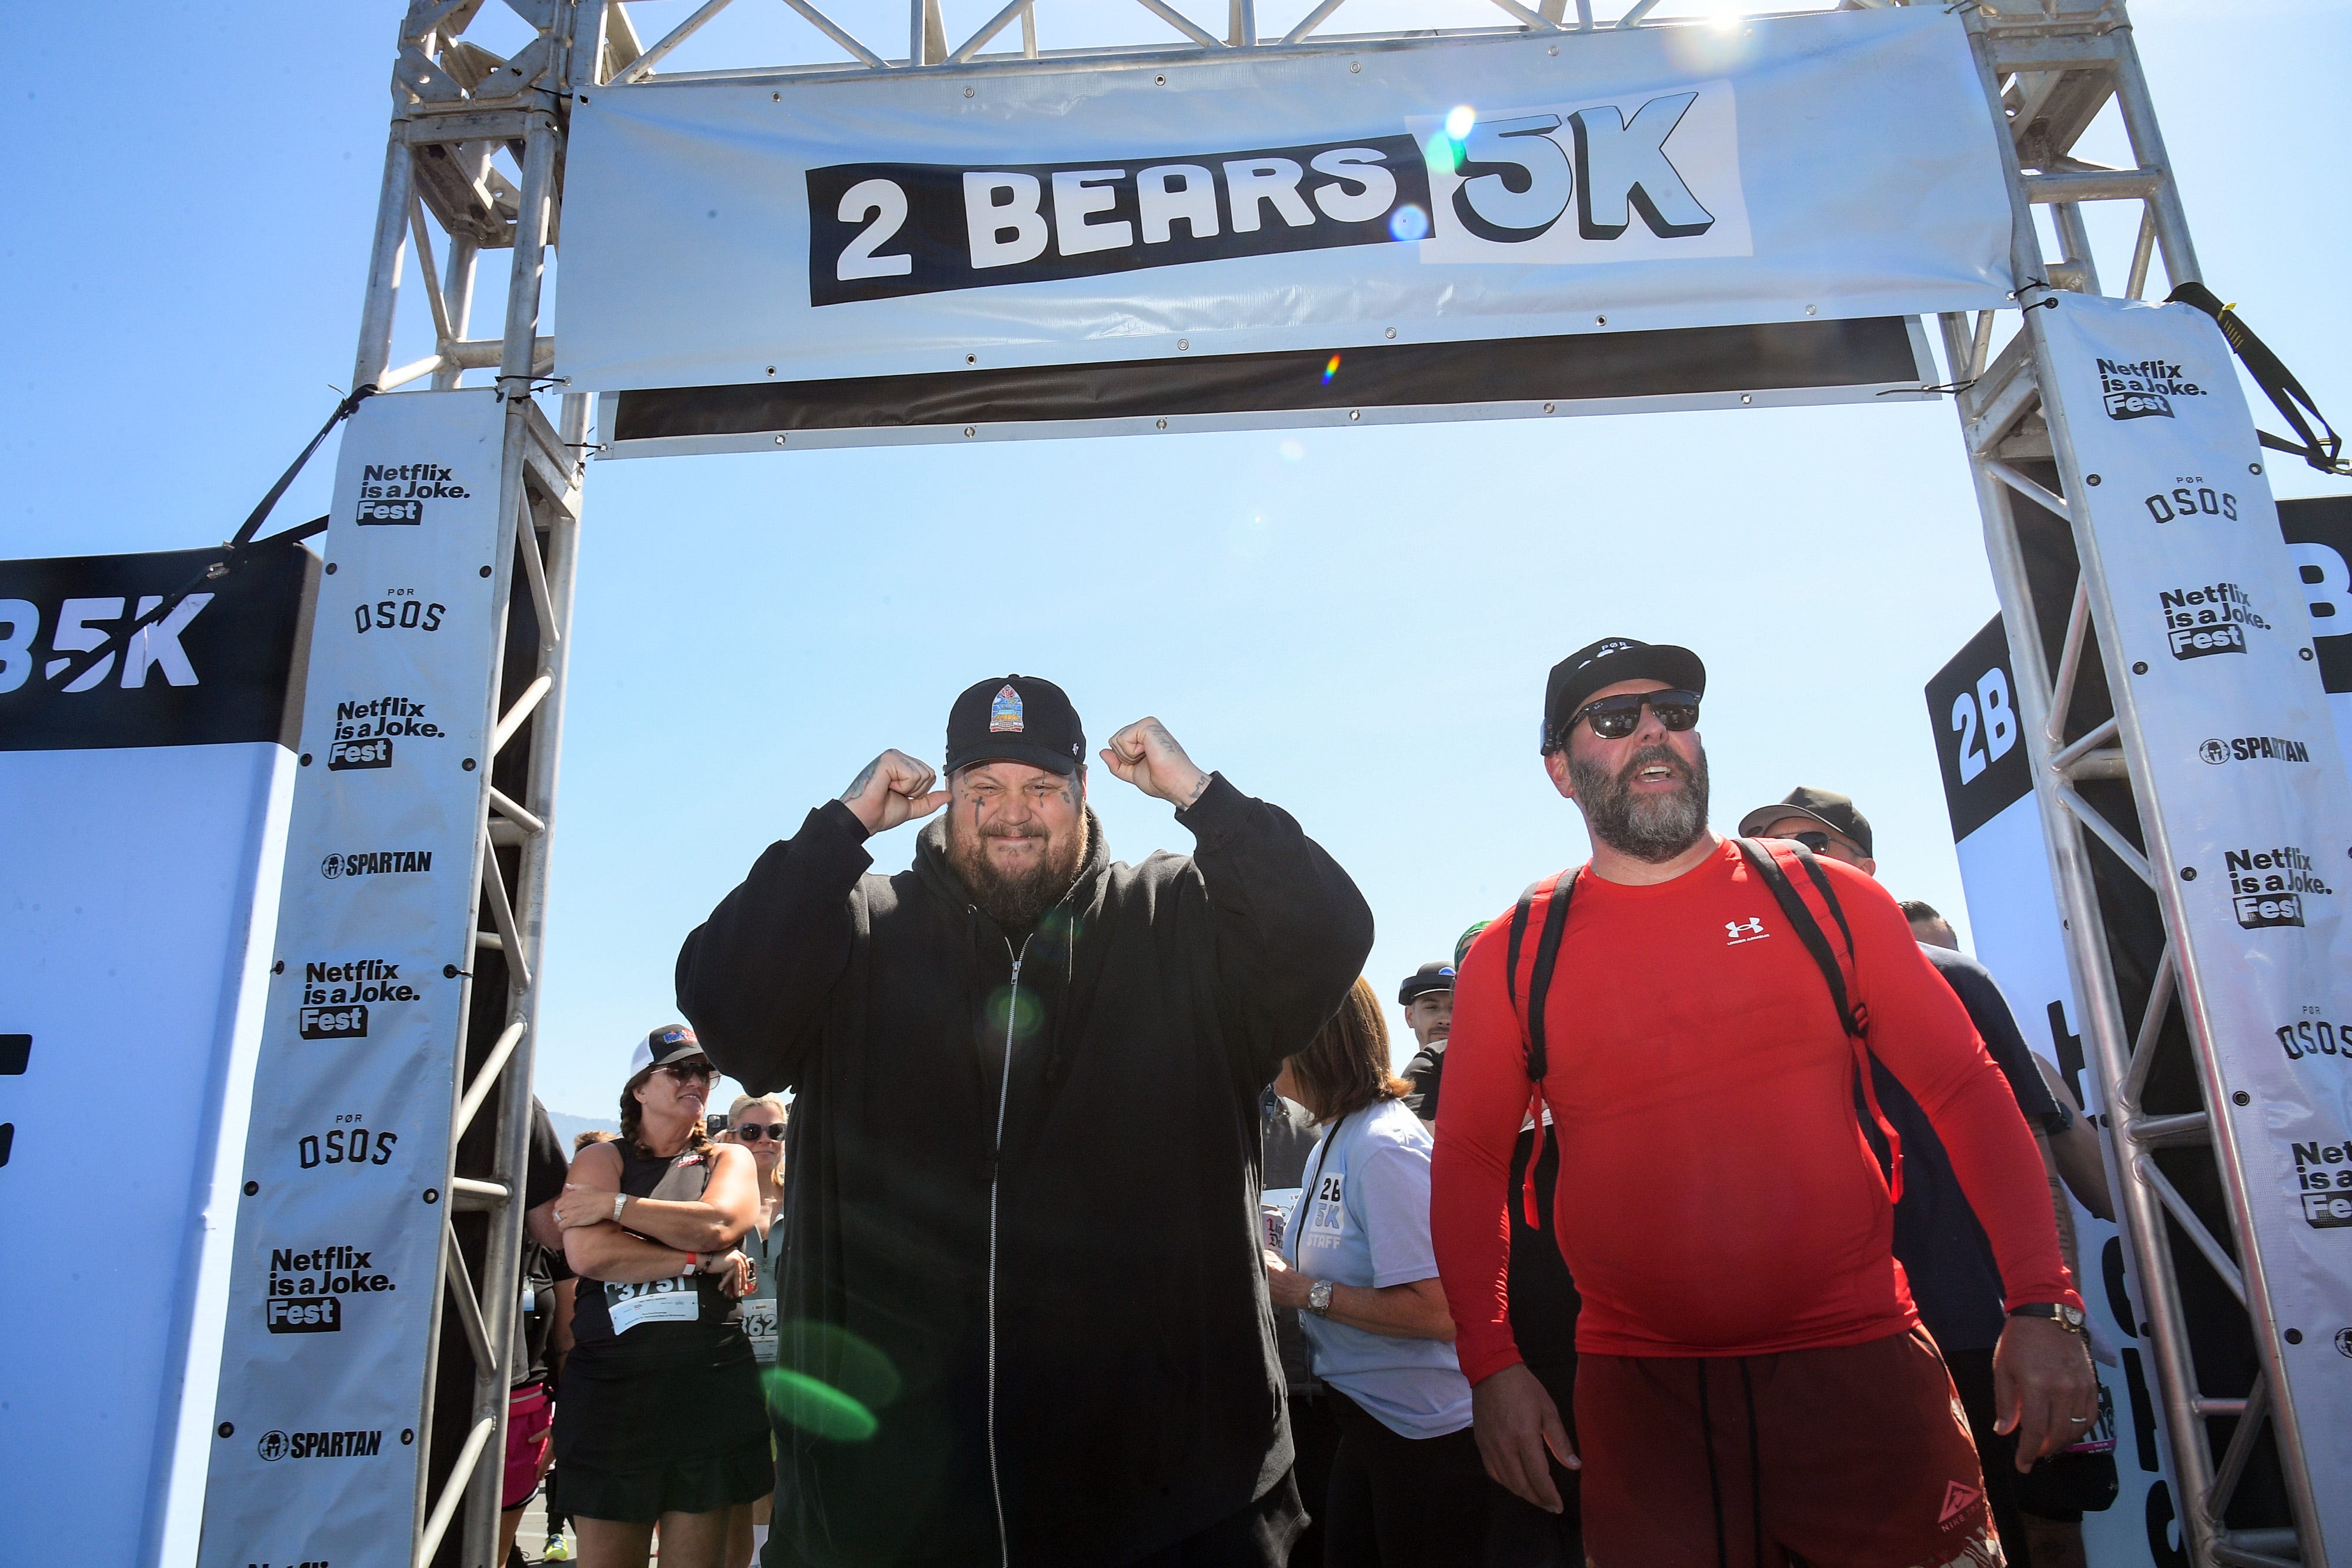 jelly roll completes 5k after 70-pound weight loss: 'really emotional'